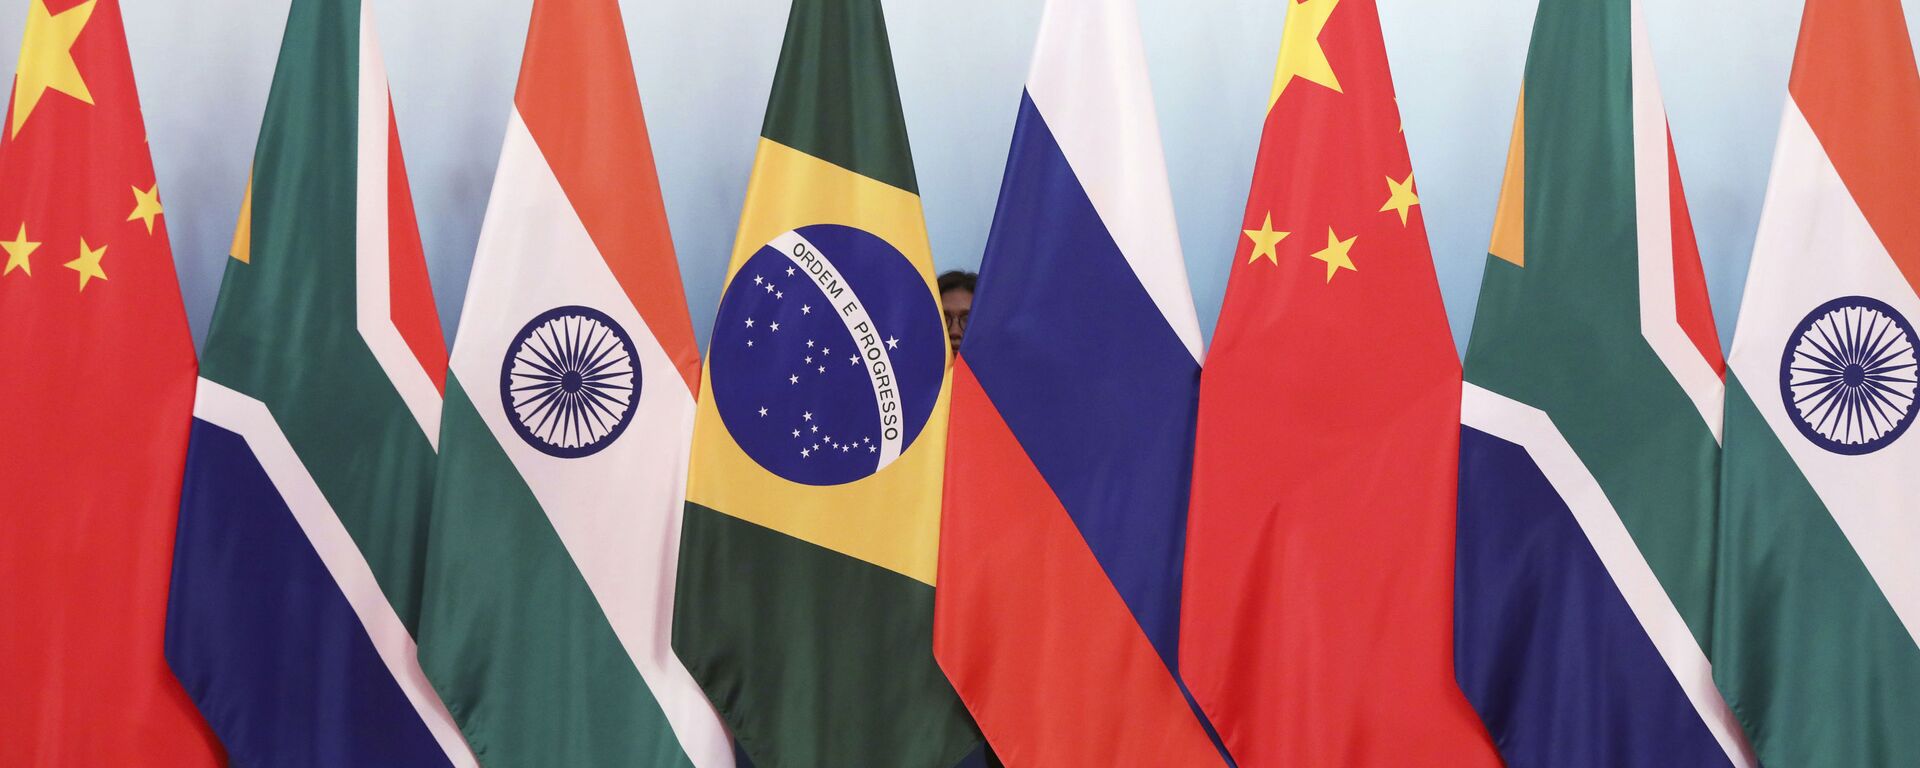 Staff worker stands behinds national flags of Brazil, Russia, China, South Africa and India to tidy the flags ahead of a group photo during the BRICS Summit at the Xiamen International Conference and Exhibition Center in Xiamen, southeastern China's Fujian Province, Monday, Sept. 4, 2017. - Sputnik Việt Nam, 1920, 10.06.2023